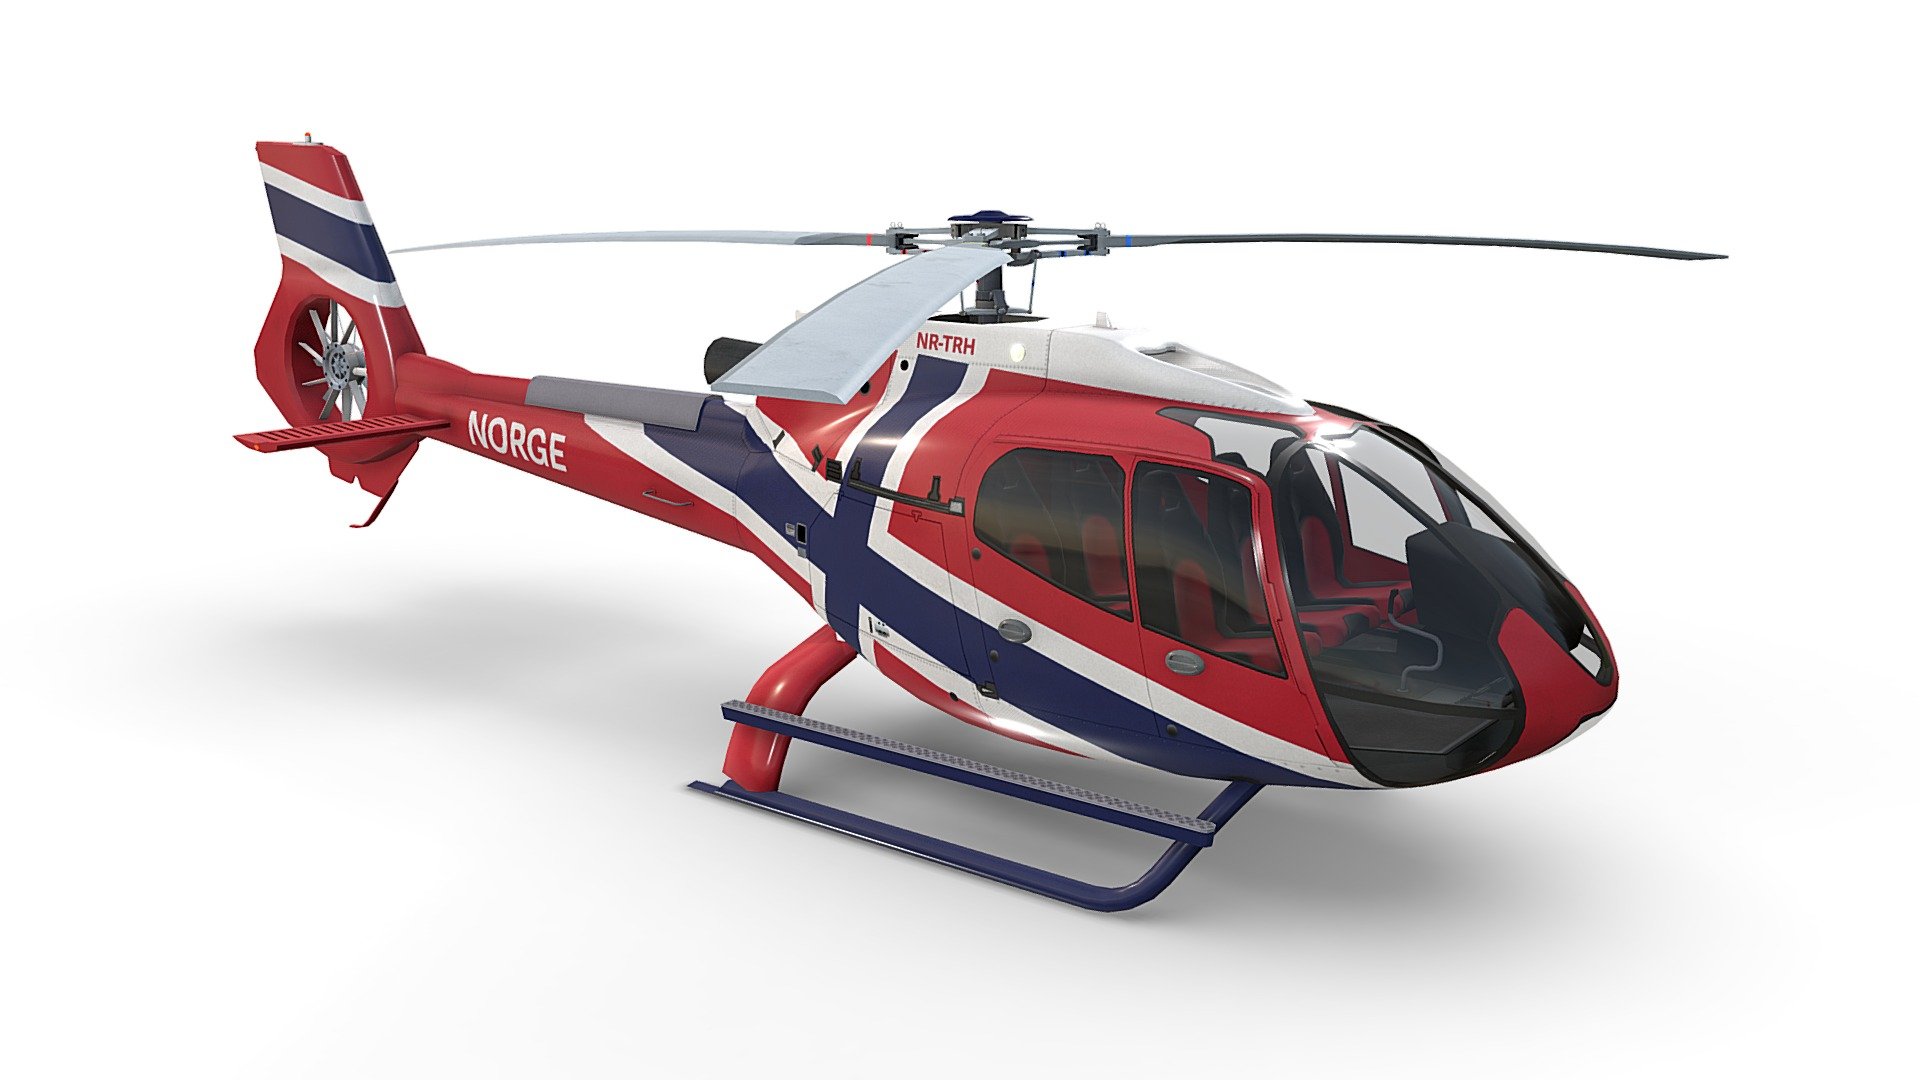 Norge (Norway) Helicopter Airbus H130 Livery 27. Game ready, realtime optimized Airbus Helicopter H130 with high visual accuracy. Both PBR workflows ready native 4096 x 4096 px textures. Clean lowpoly mesh with 4 preconfigured level of details LOD0 19710 tris, LOD1 10462 tris, LOD2 7388 tris, LOD3 5990 tris. Properly placed rotors pivots for flawless rotations. Simple capsule built interior that fits perfectly the body. 100% human controlled triangulation. All parts 100% unwrapped non-overlapping. Made using blueprints in real world scale meters. Included are flawless files .max (native 3dsmax 2014), .fbx, and .obj. All LOD are exported seperately and together in each file format 3d model